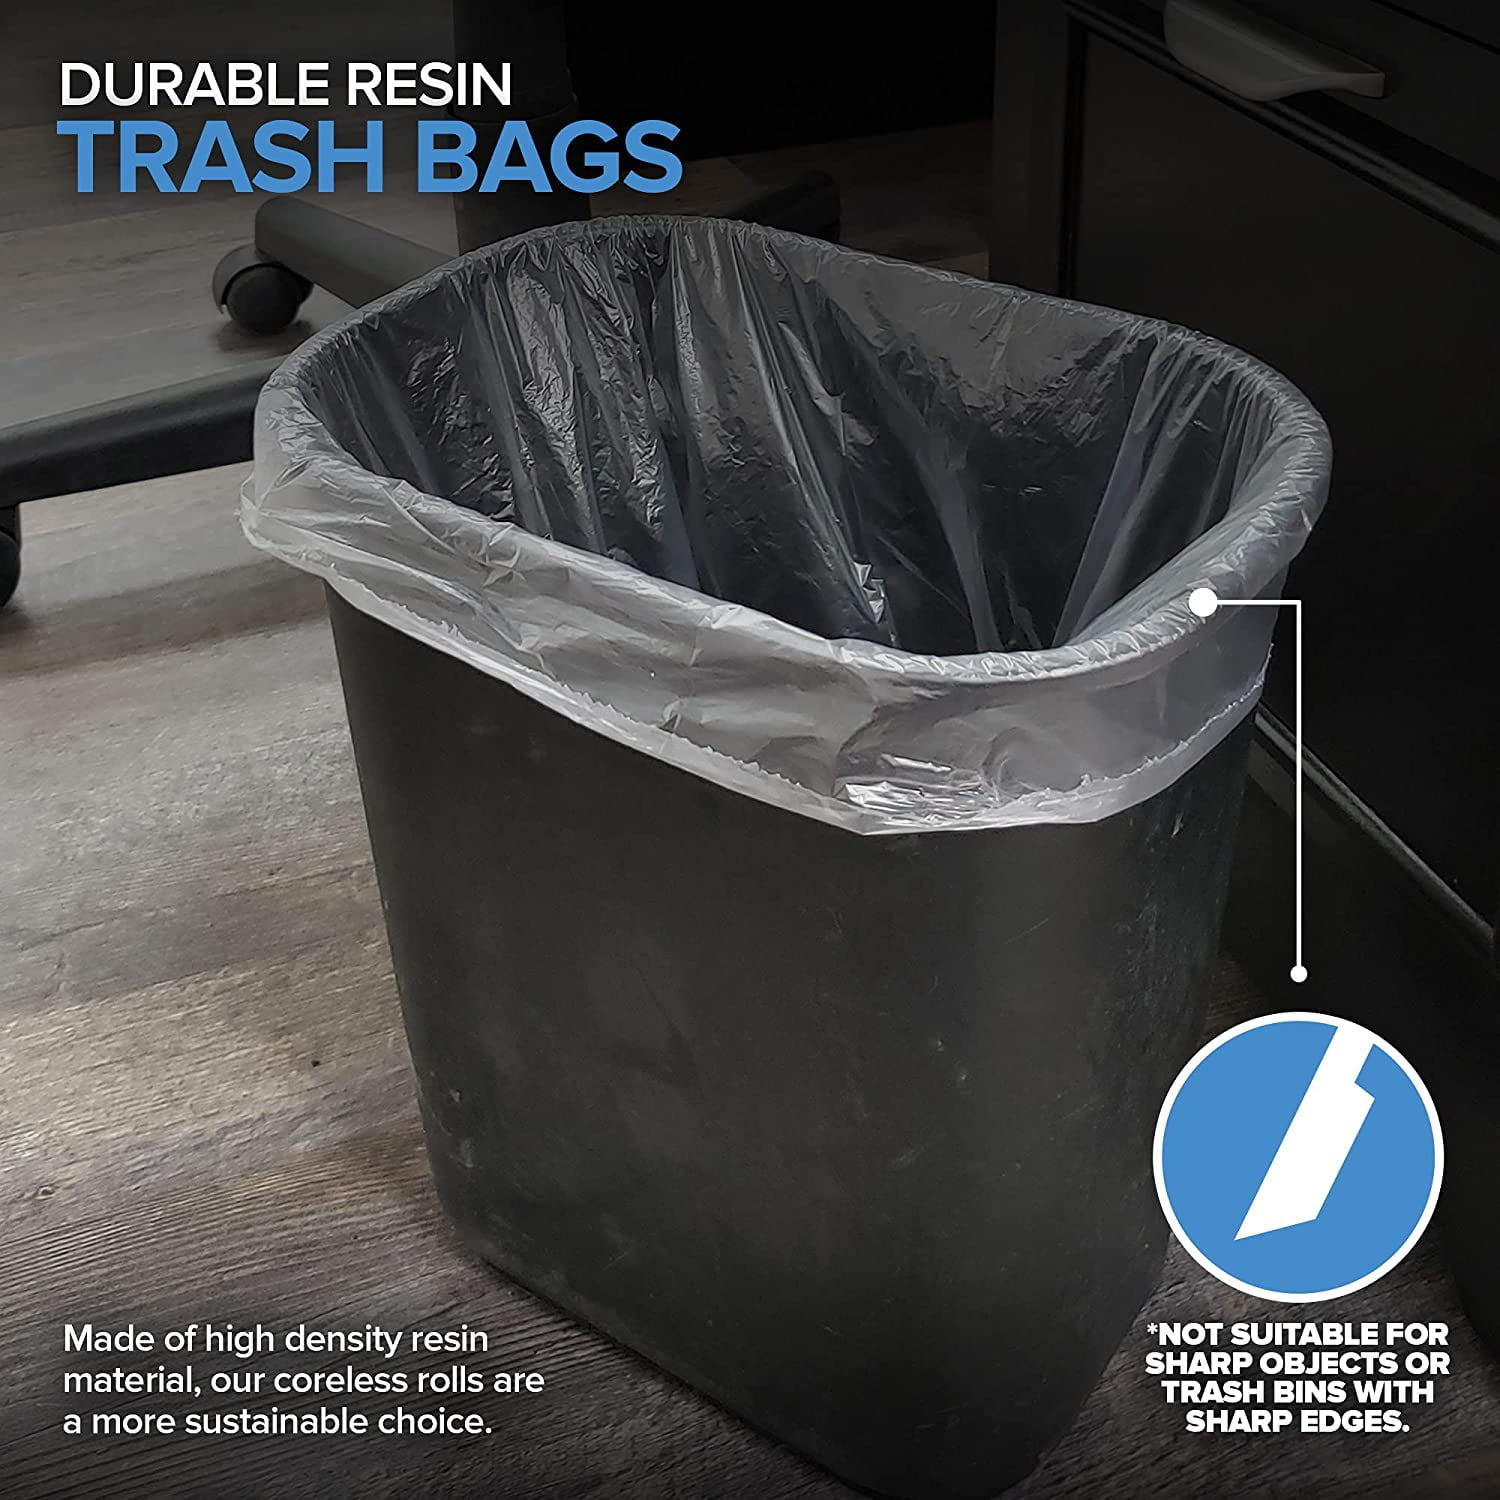 Stock Your Home 4 Gallon Clear Trash Bags (100 Pack) - Disposable Plastic Garbage  Bags - Leak Resistant Waste Bin Bags - Small Bags for Office, Bathroom,  Deli, Produce Section, Dog Poop, Cat Litter